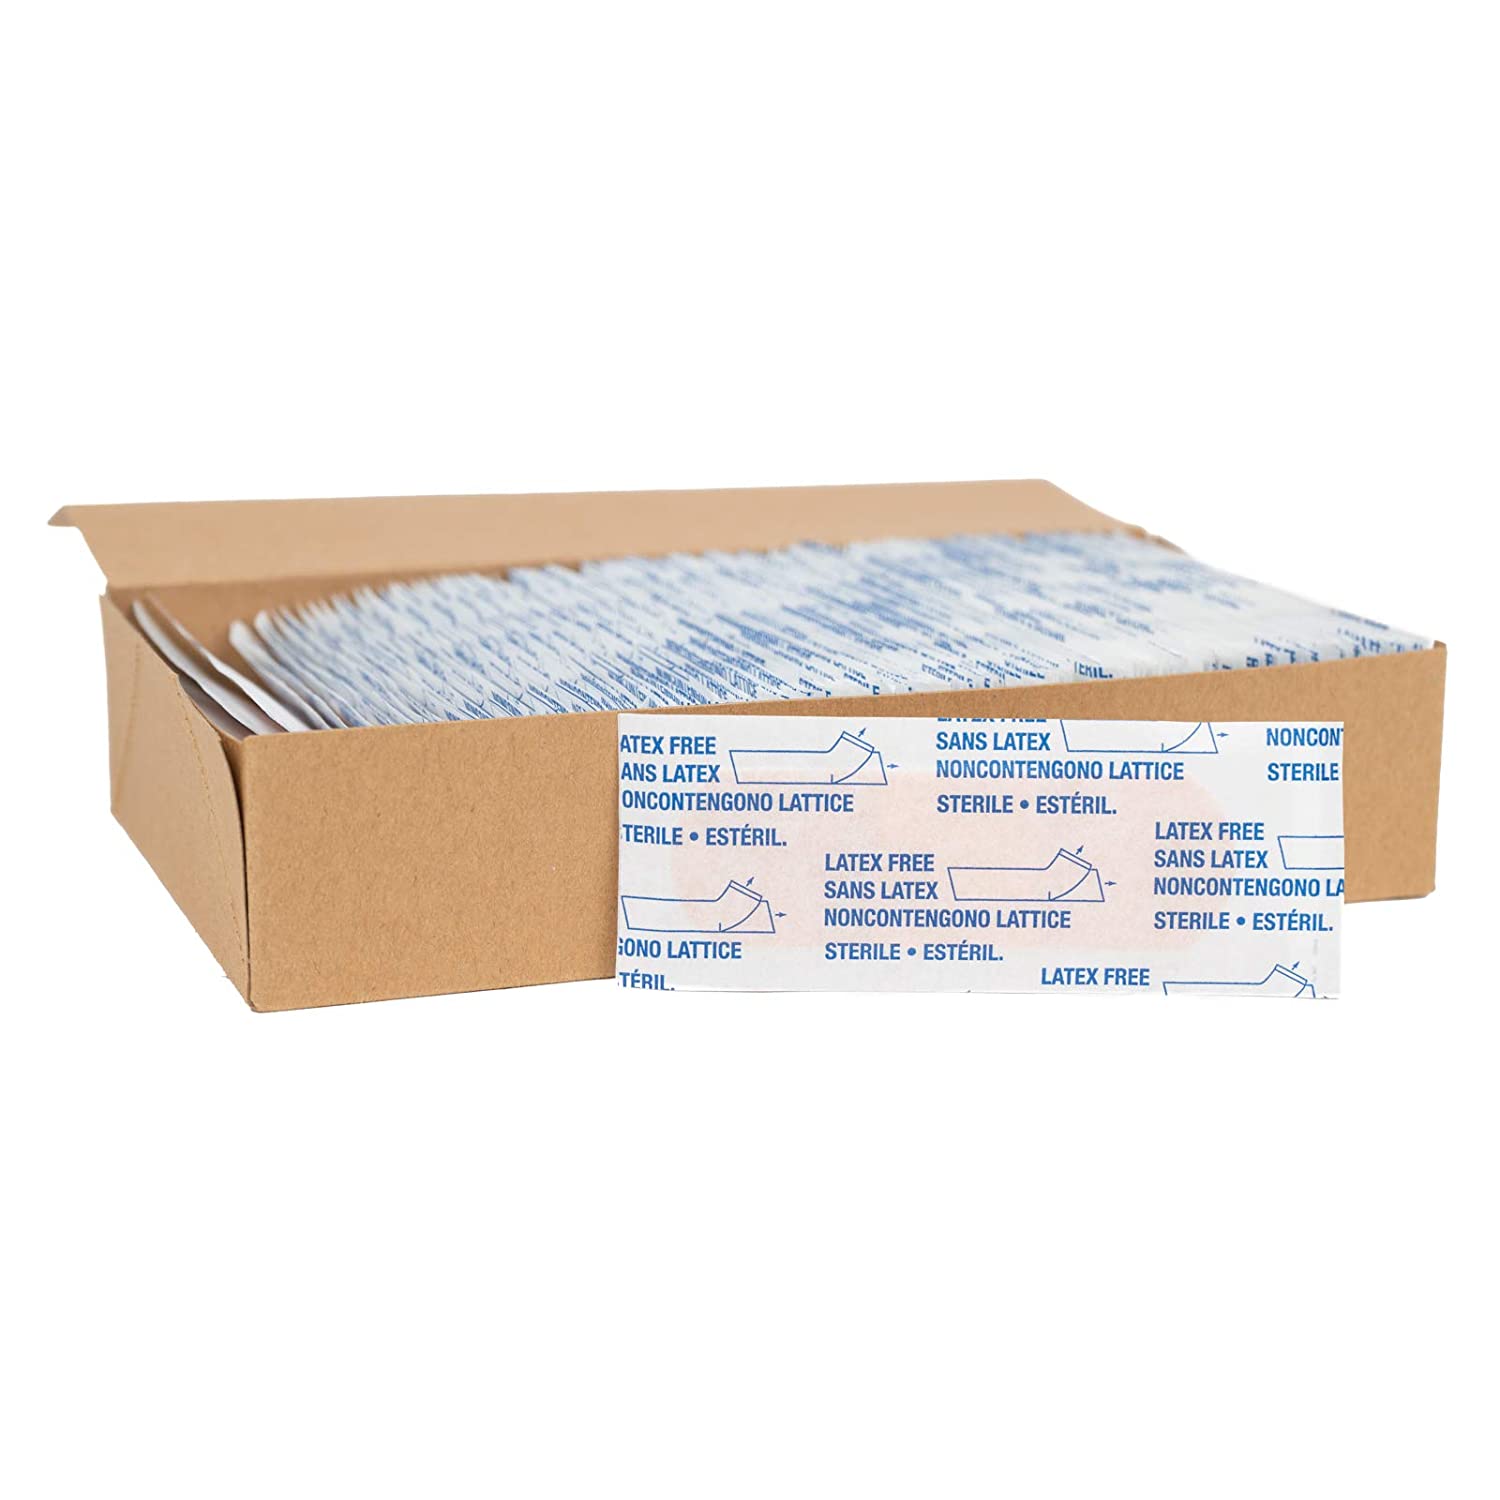 American White Cross Adhesive Bandages, Sheer Strips, 1" x 3", Case of 1500